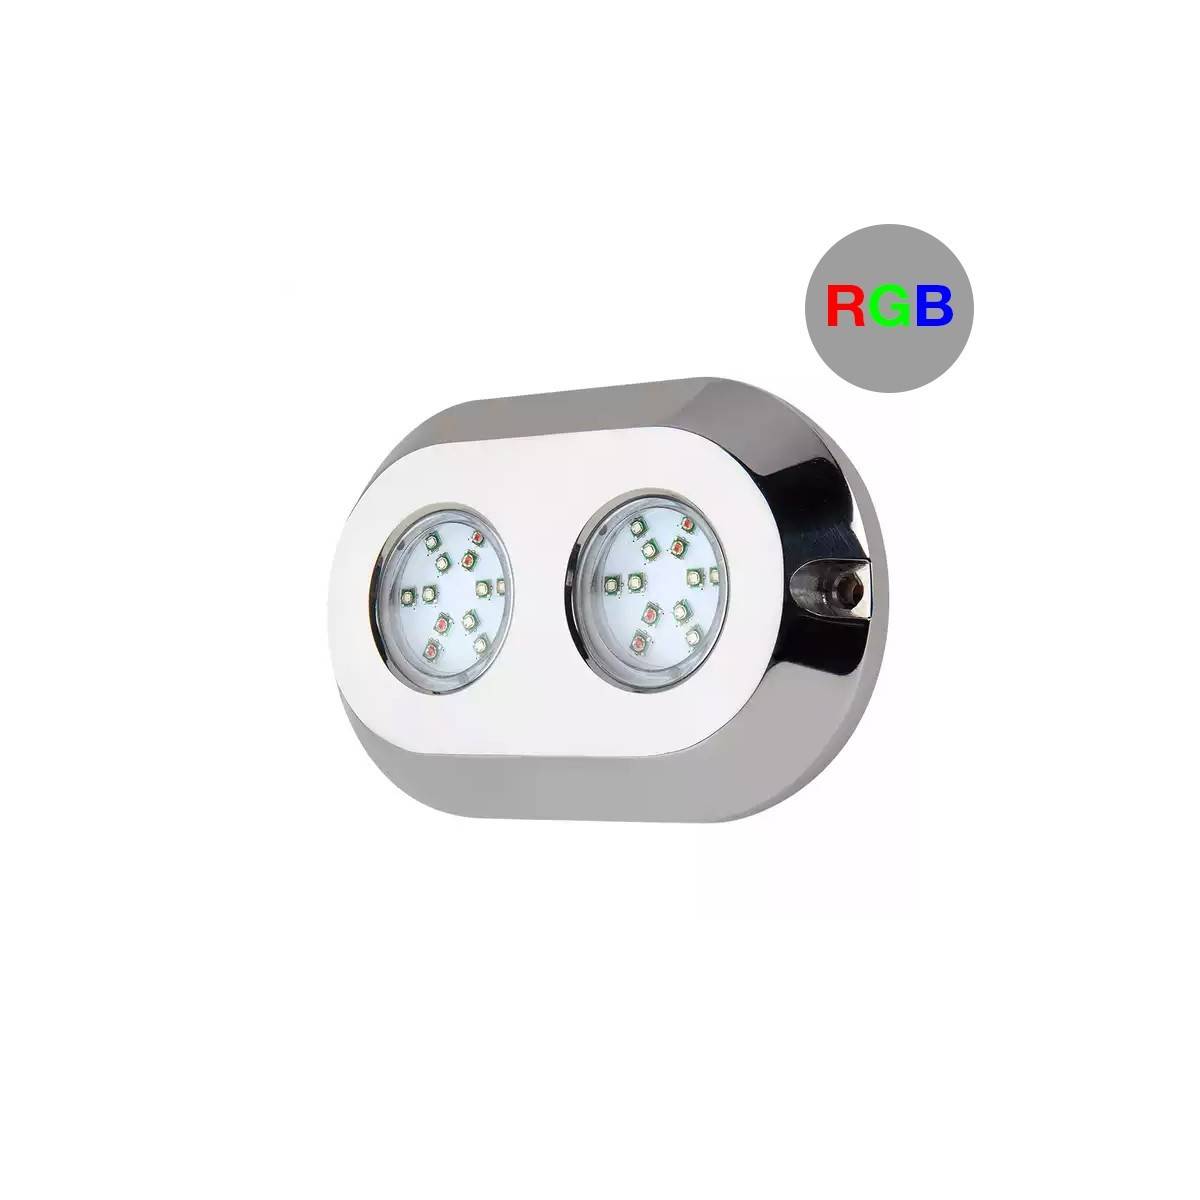 Submersible RGB LED light for boats